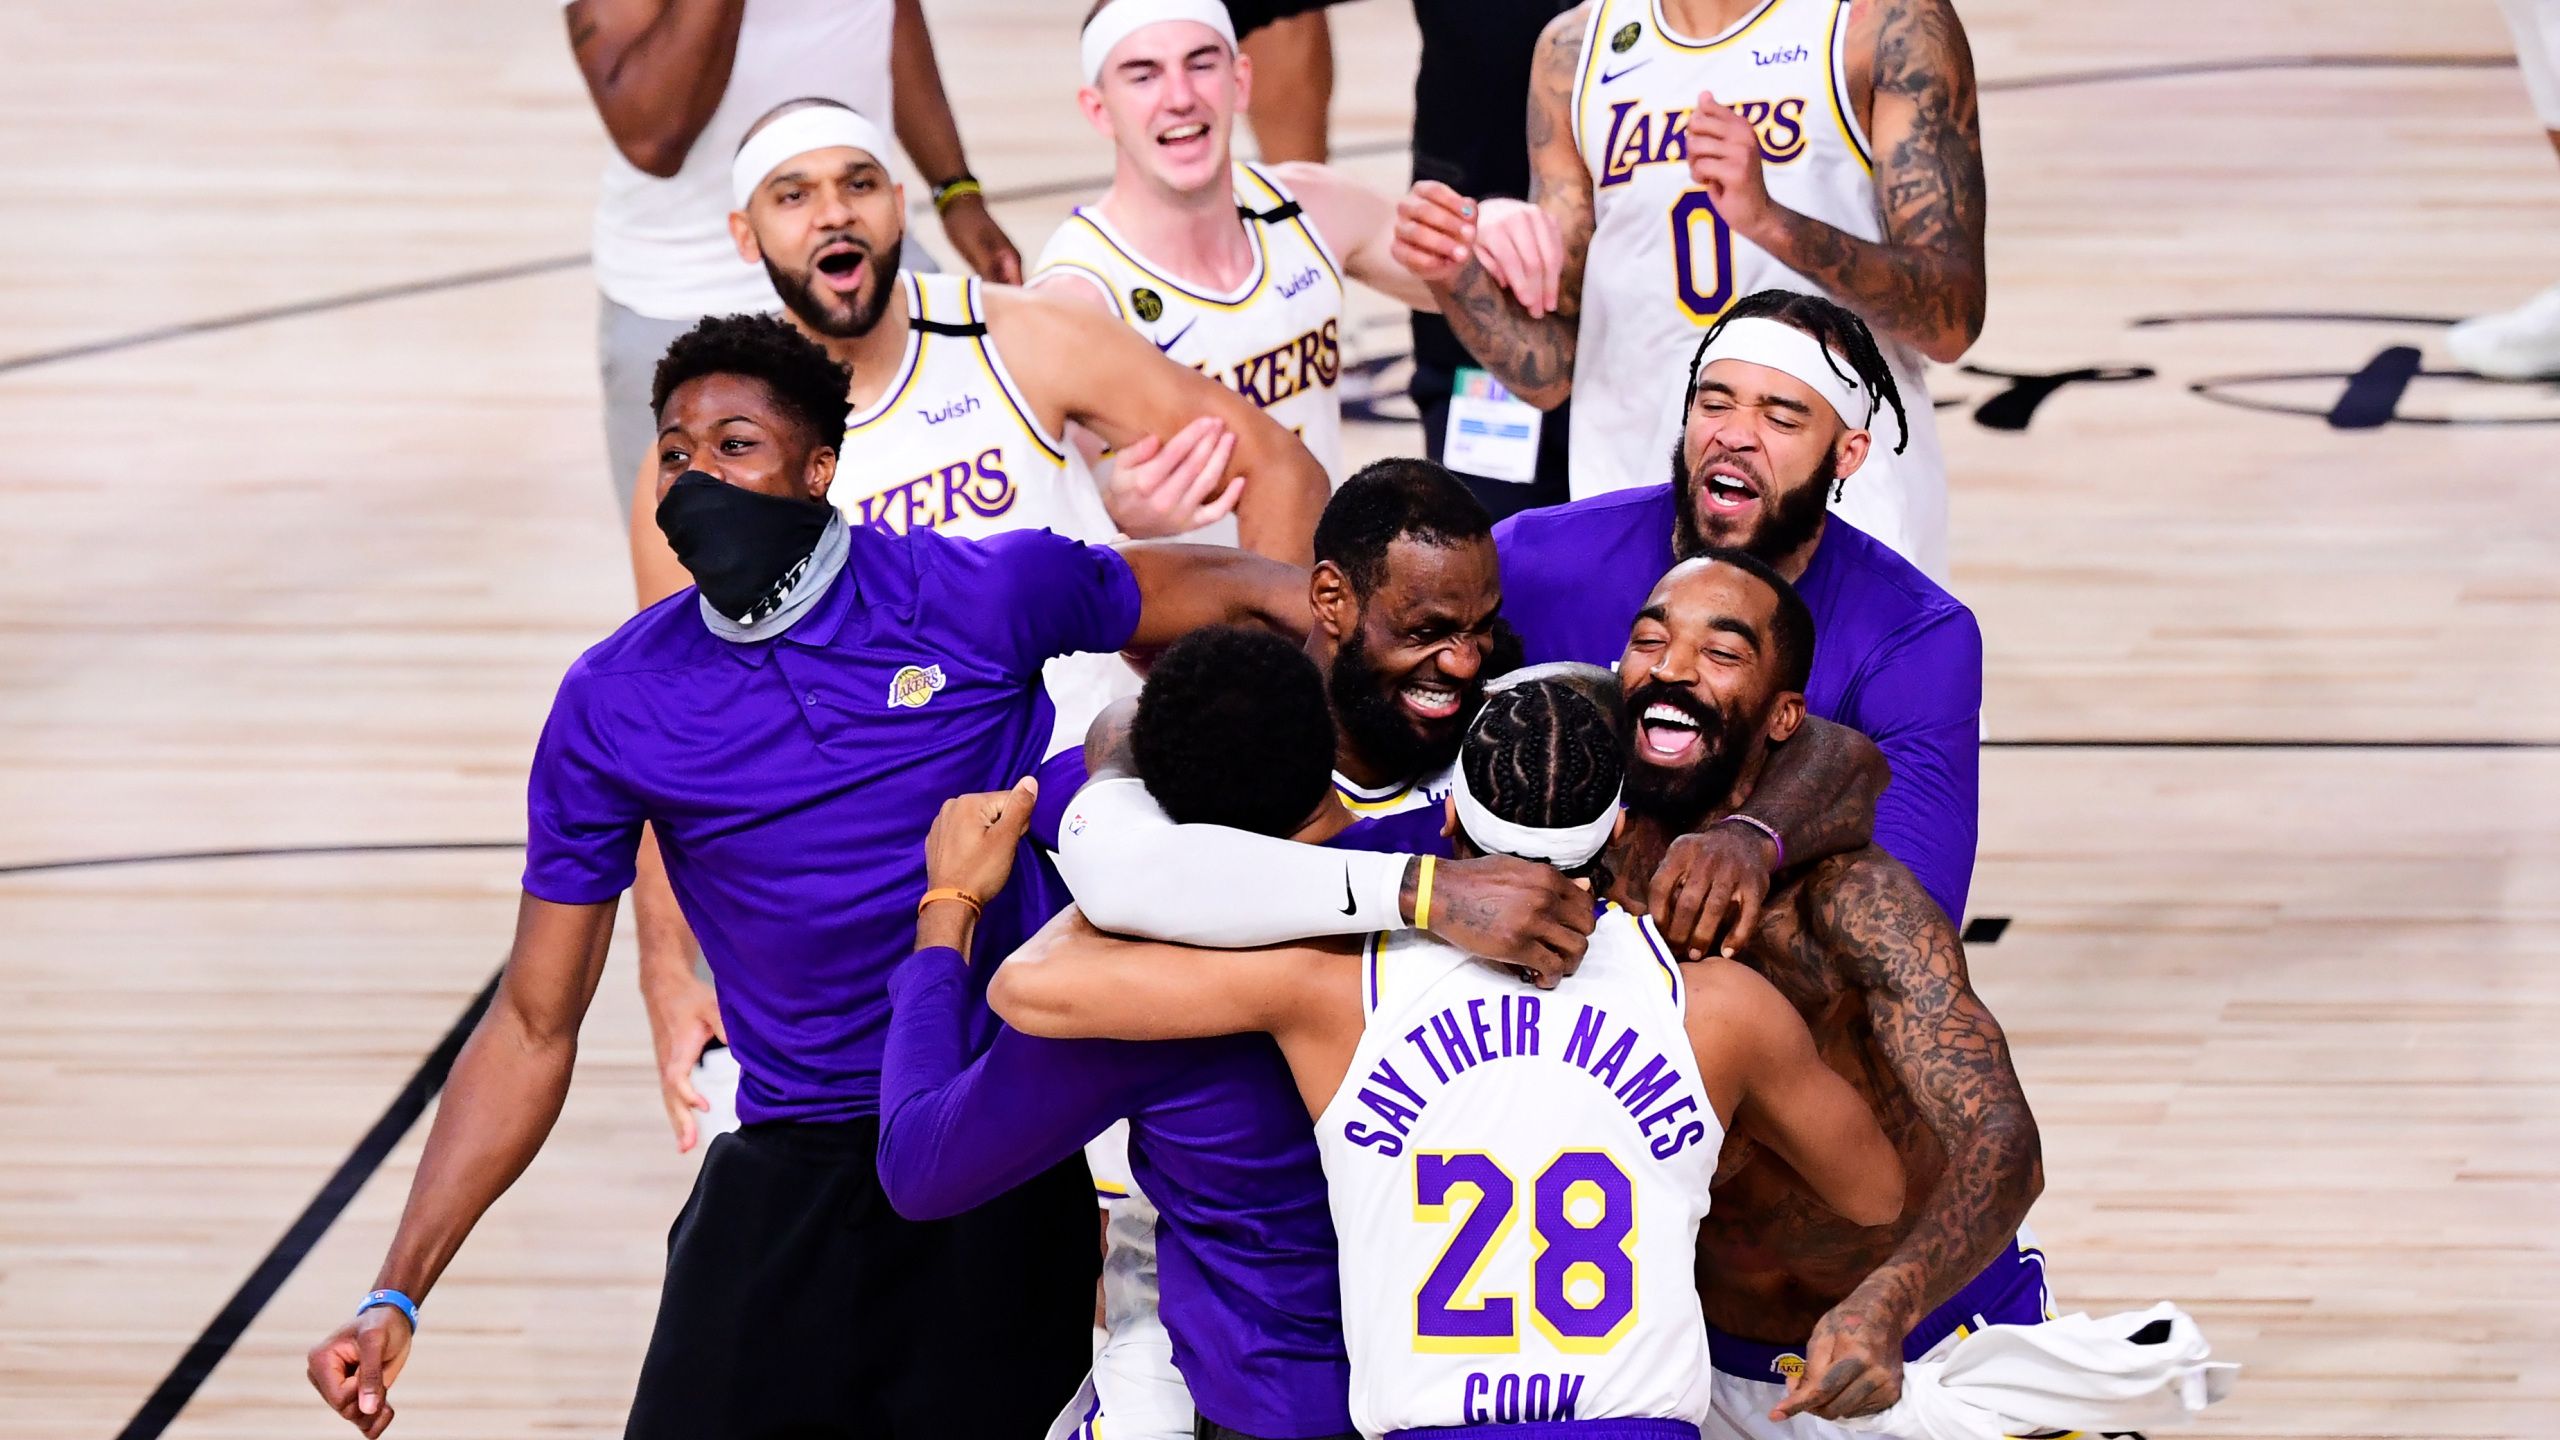 No L.A. victory parade planned yet to celebrate Lakers win amid pandemic